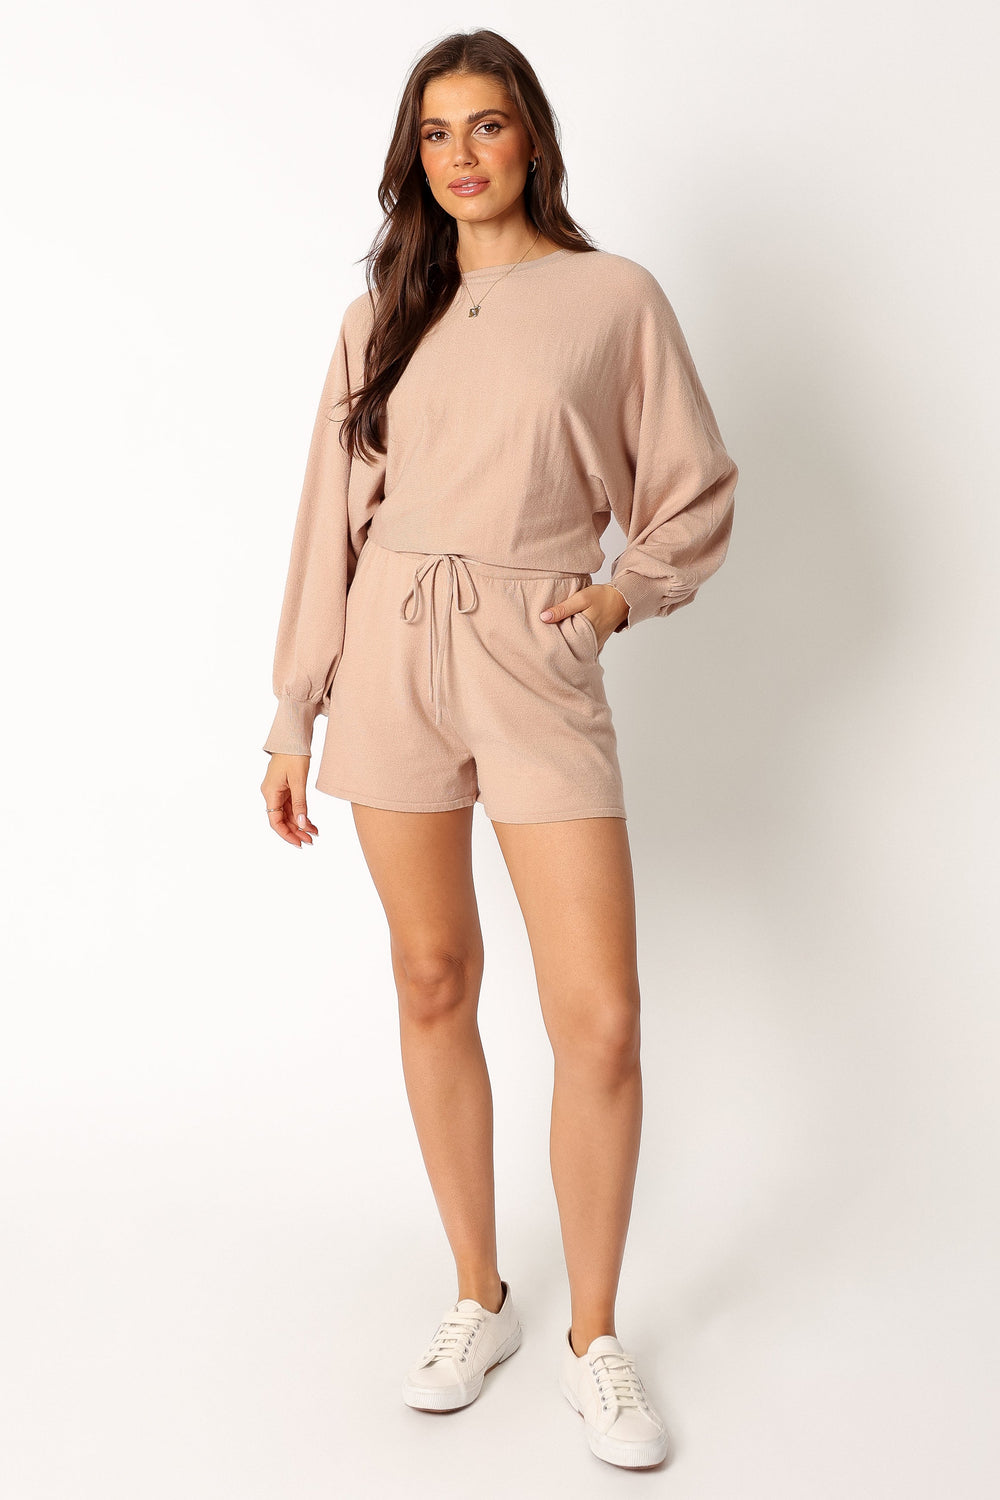 Petal and Pup USA Rompers Blakey Romper - Light Taupe